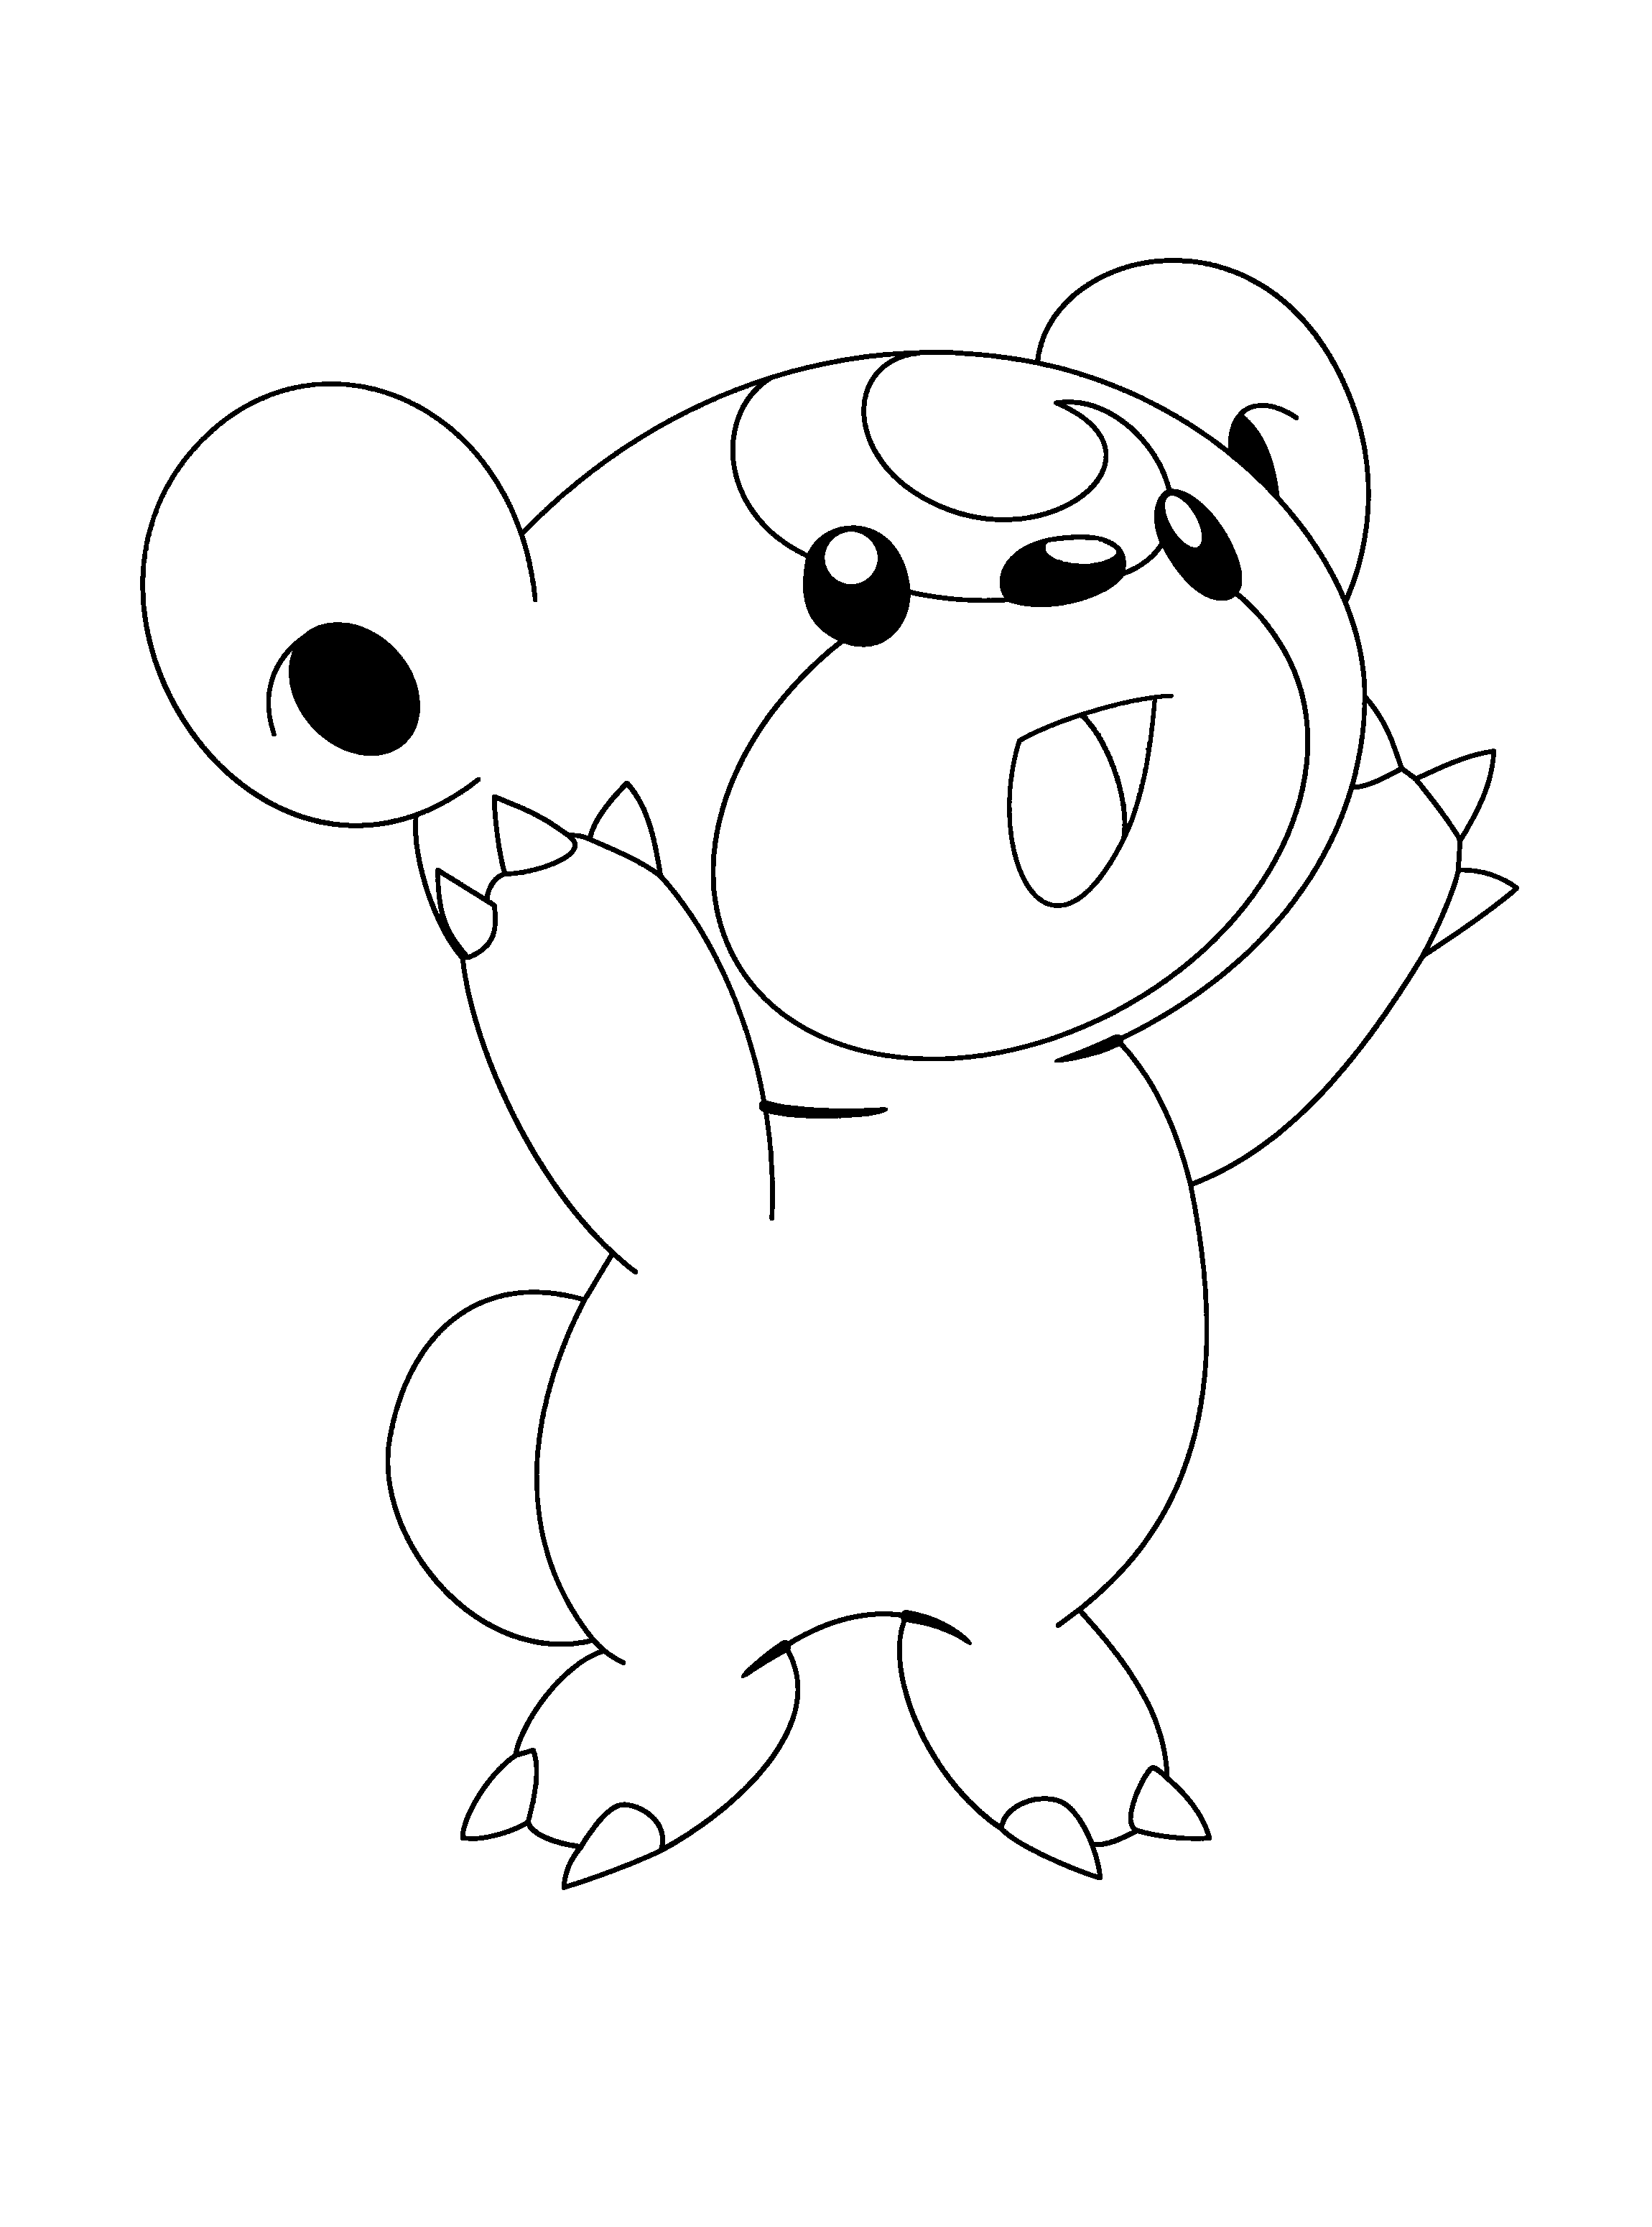 Pokemon coloring pages | Kids coloring pages | #15